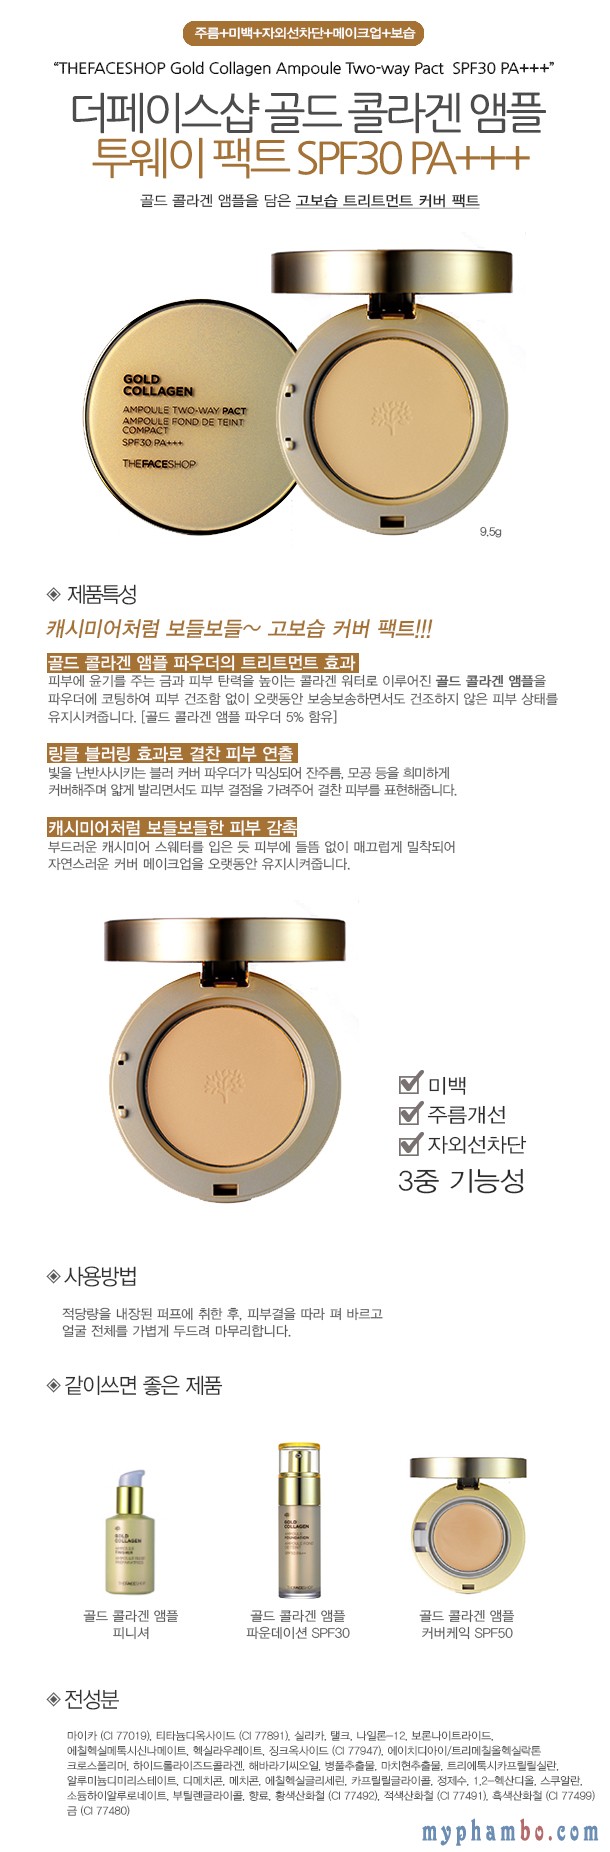 Phan Gold Collagen Ampoule Two-way Pact The Face Shop 